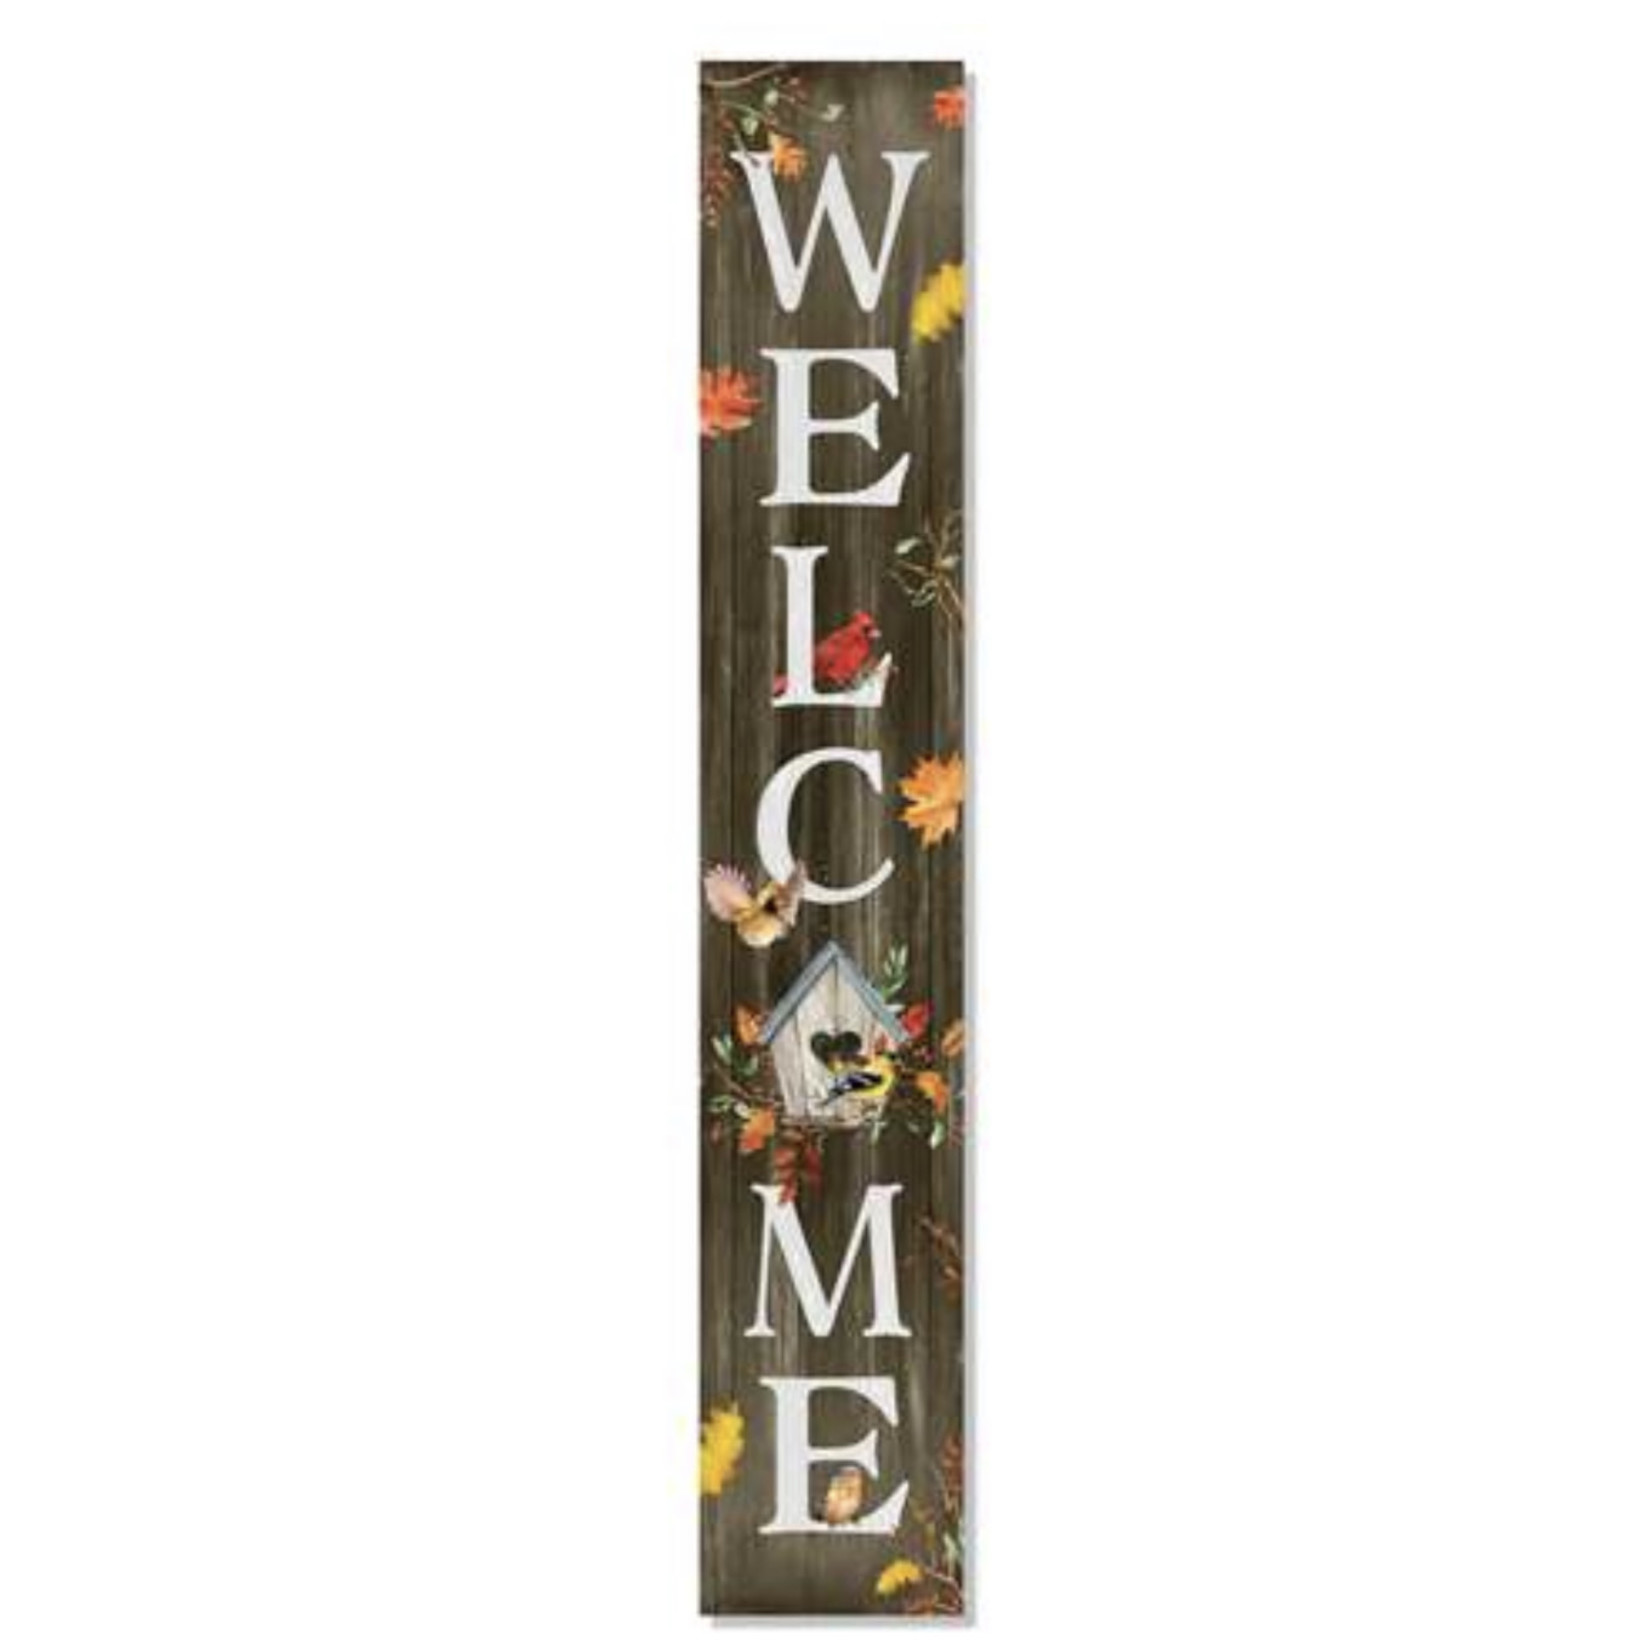 My Word! Fall Birdhouse Porch Board Sign